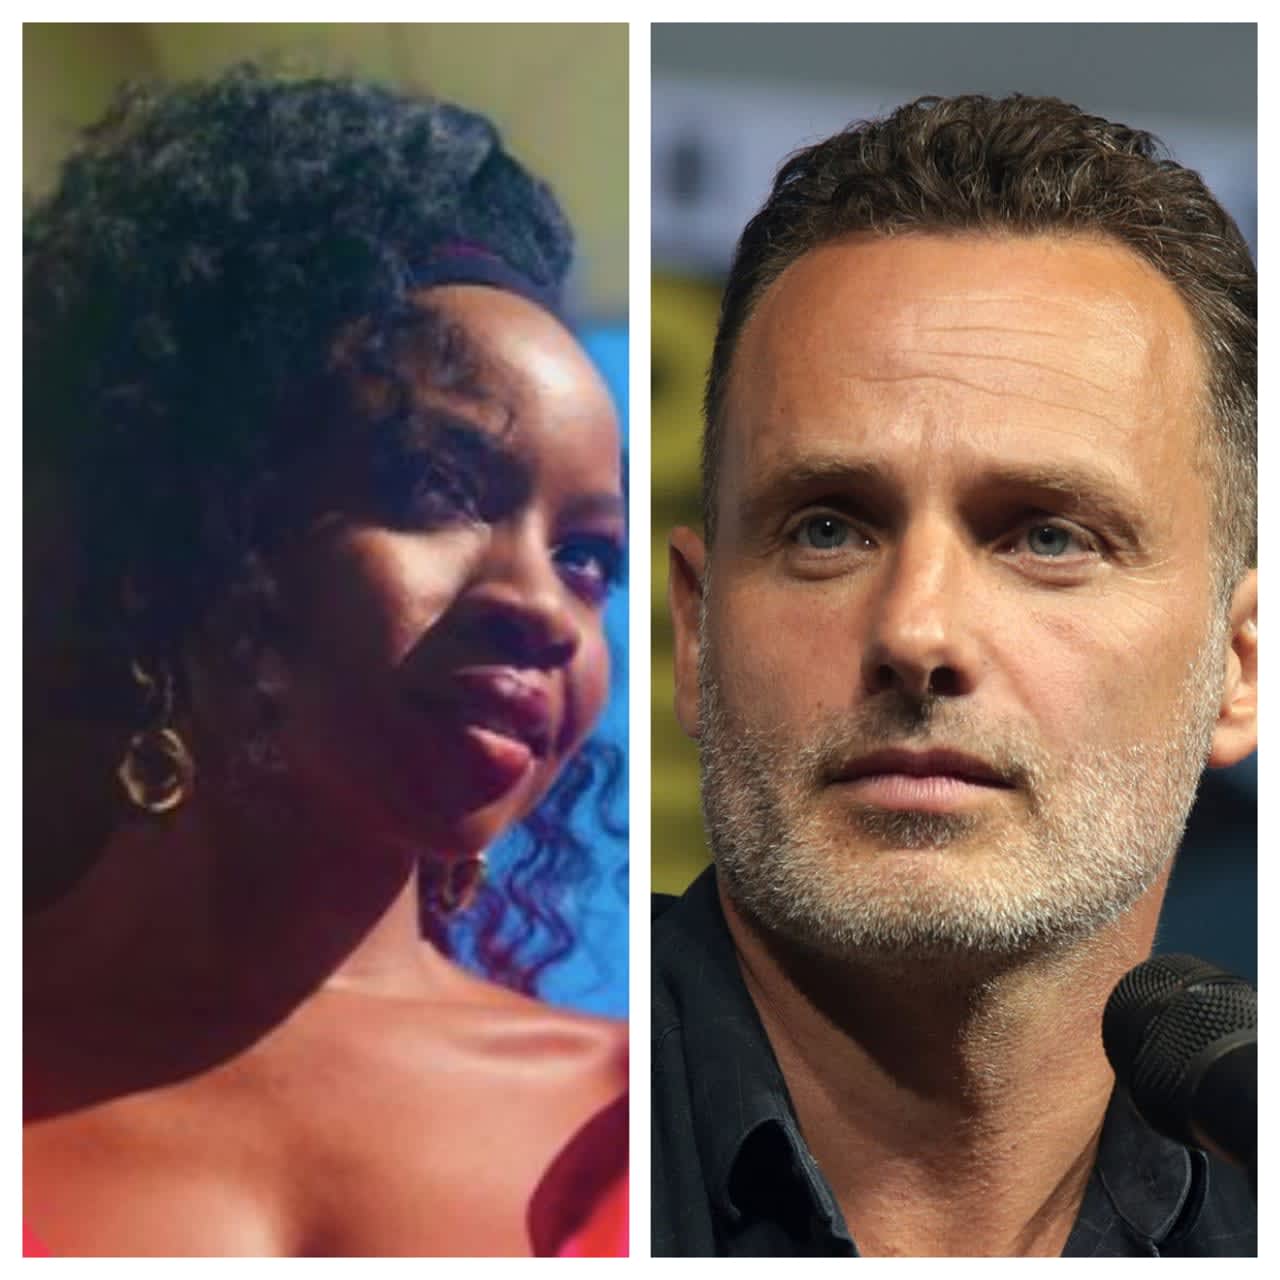 Danai Gurira and Andrew Lincoln will star in "The Walking Dead: Summit" on AMC.